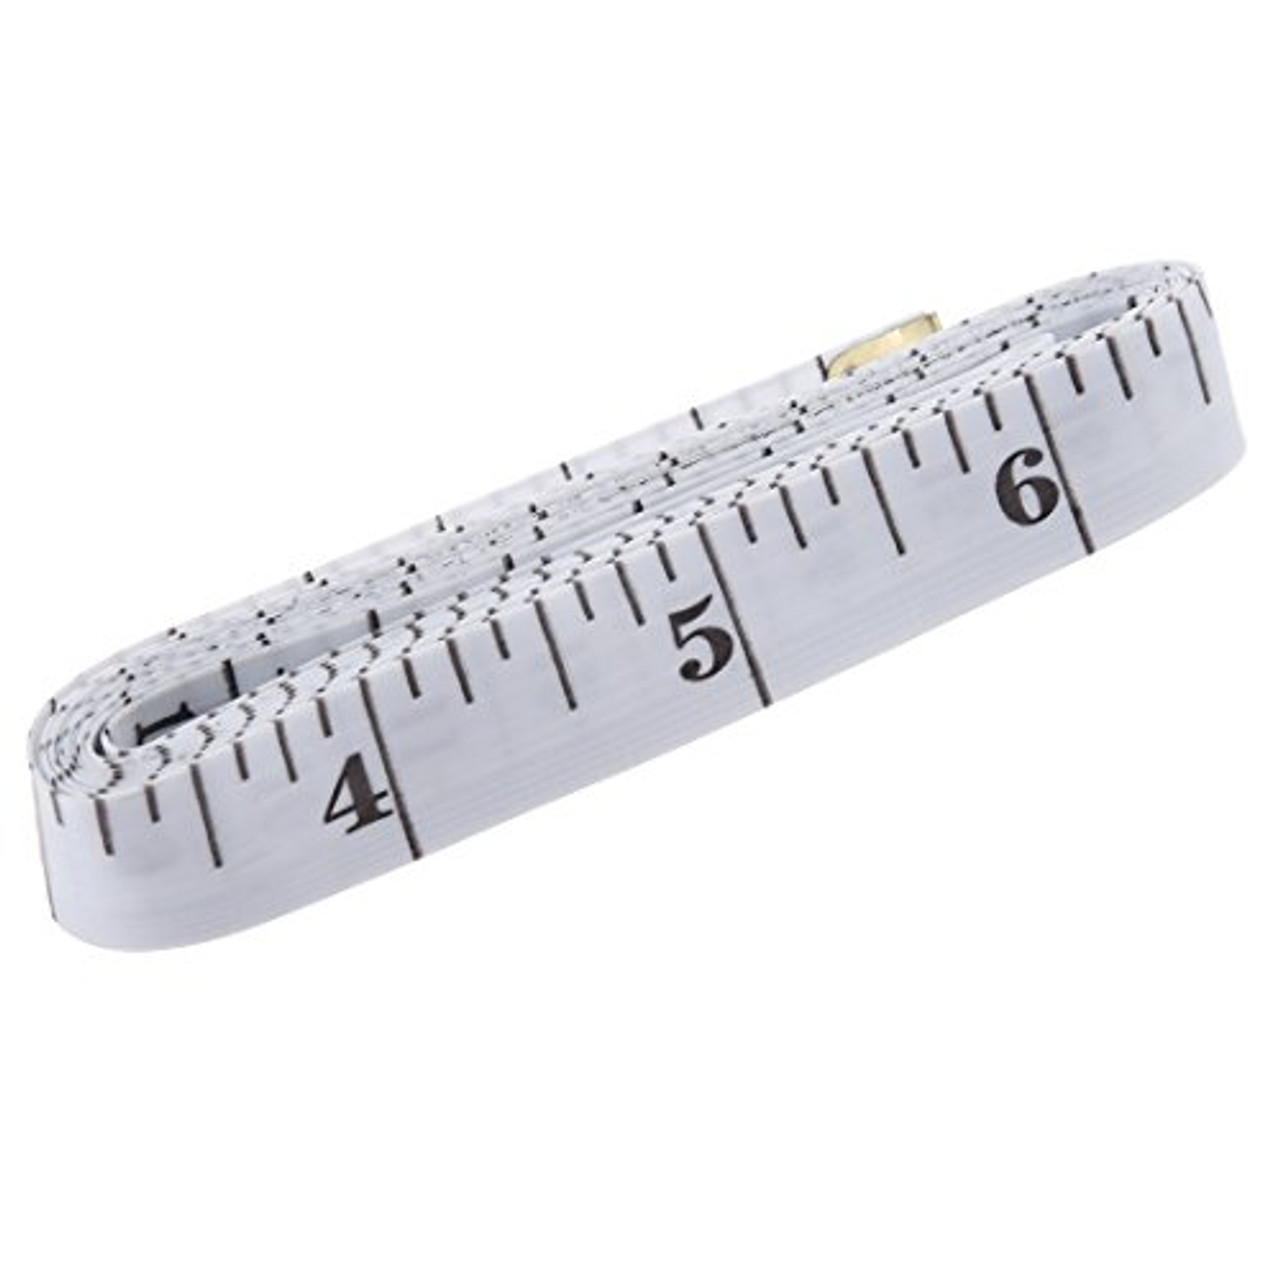 Adhesive Backed Tape Measure 12 inch Measuring Tool for Tailor Sewing